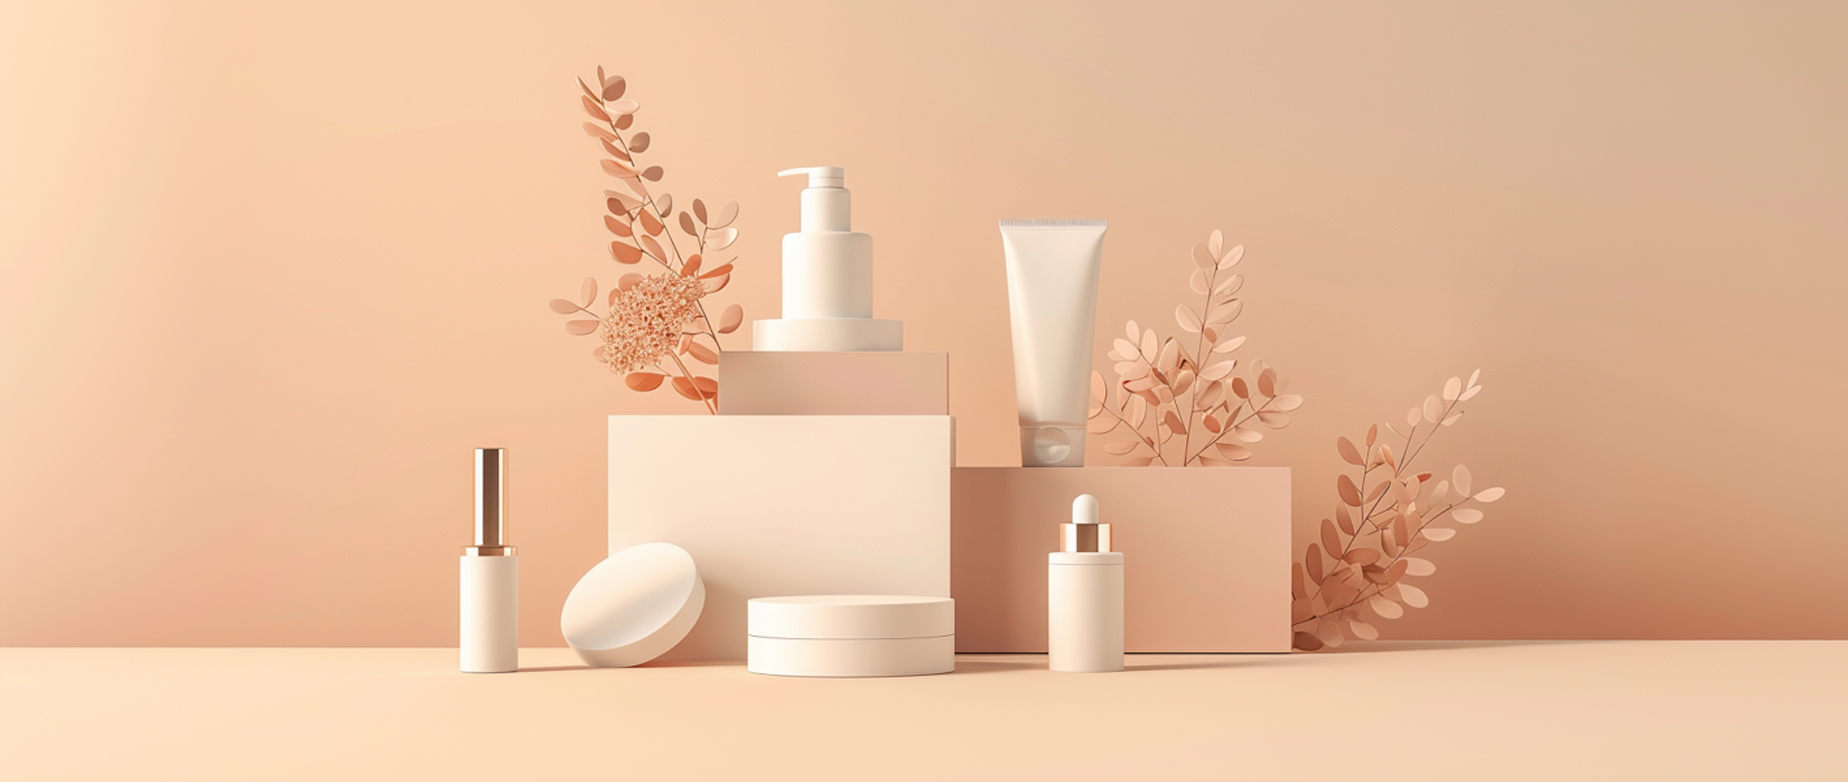 A cosmetics product display on a peach colored background.